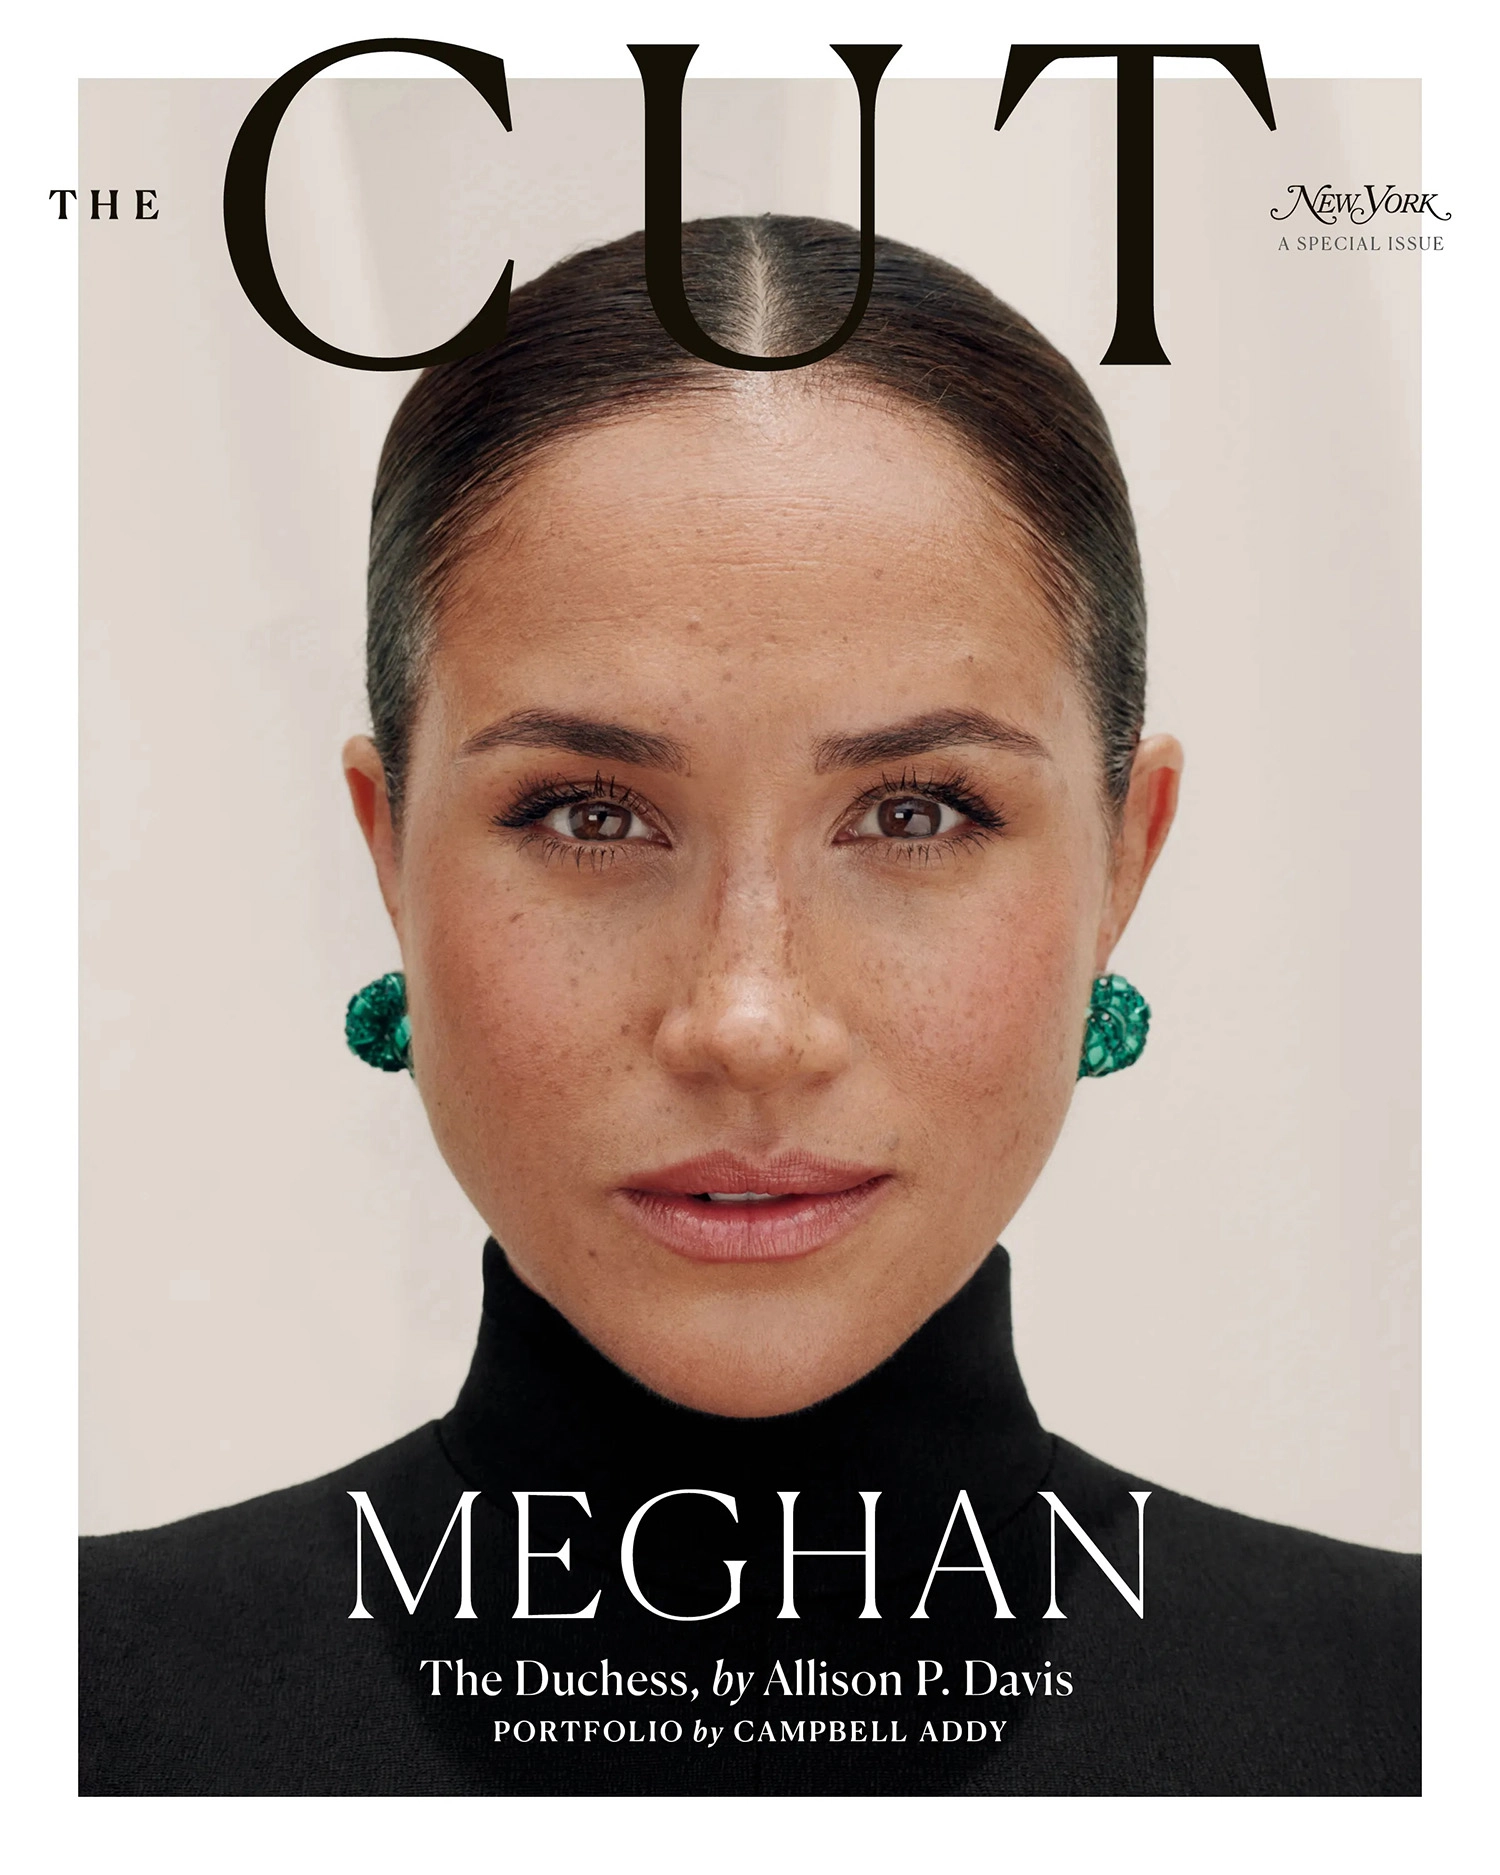 Meghan Markle covers The Cut Fall 2022 by Campbell Addy